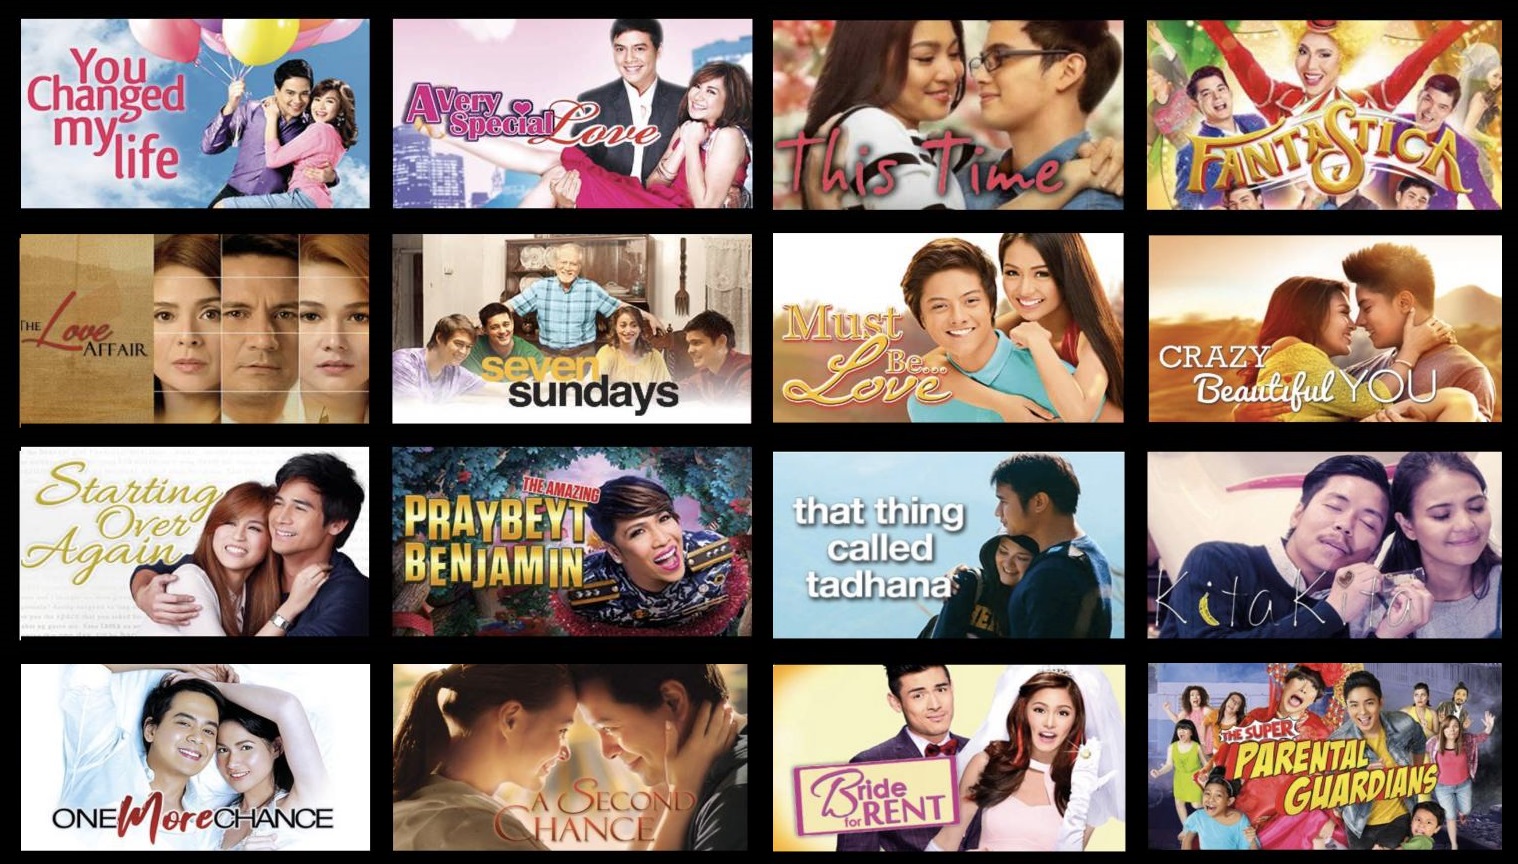 constance frazier recommends Watch Tagalog Movie Online